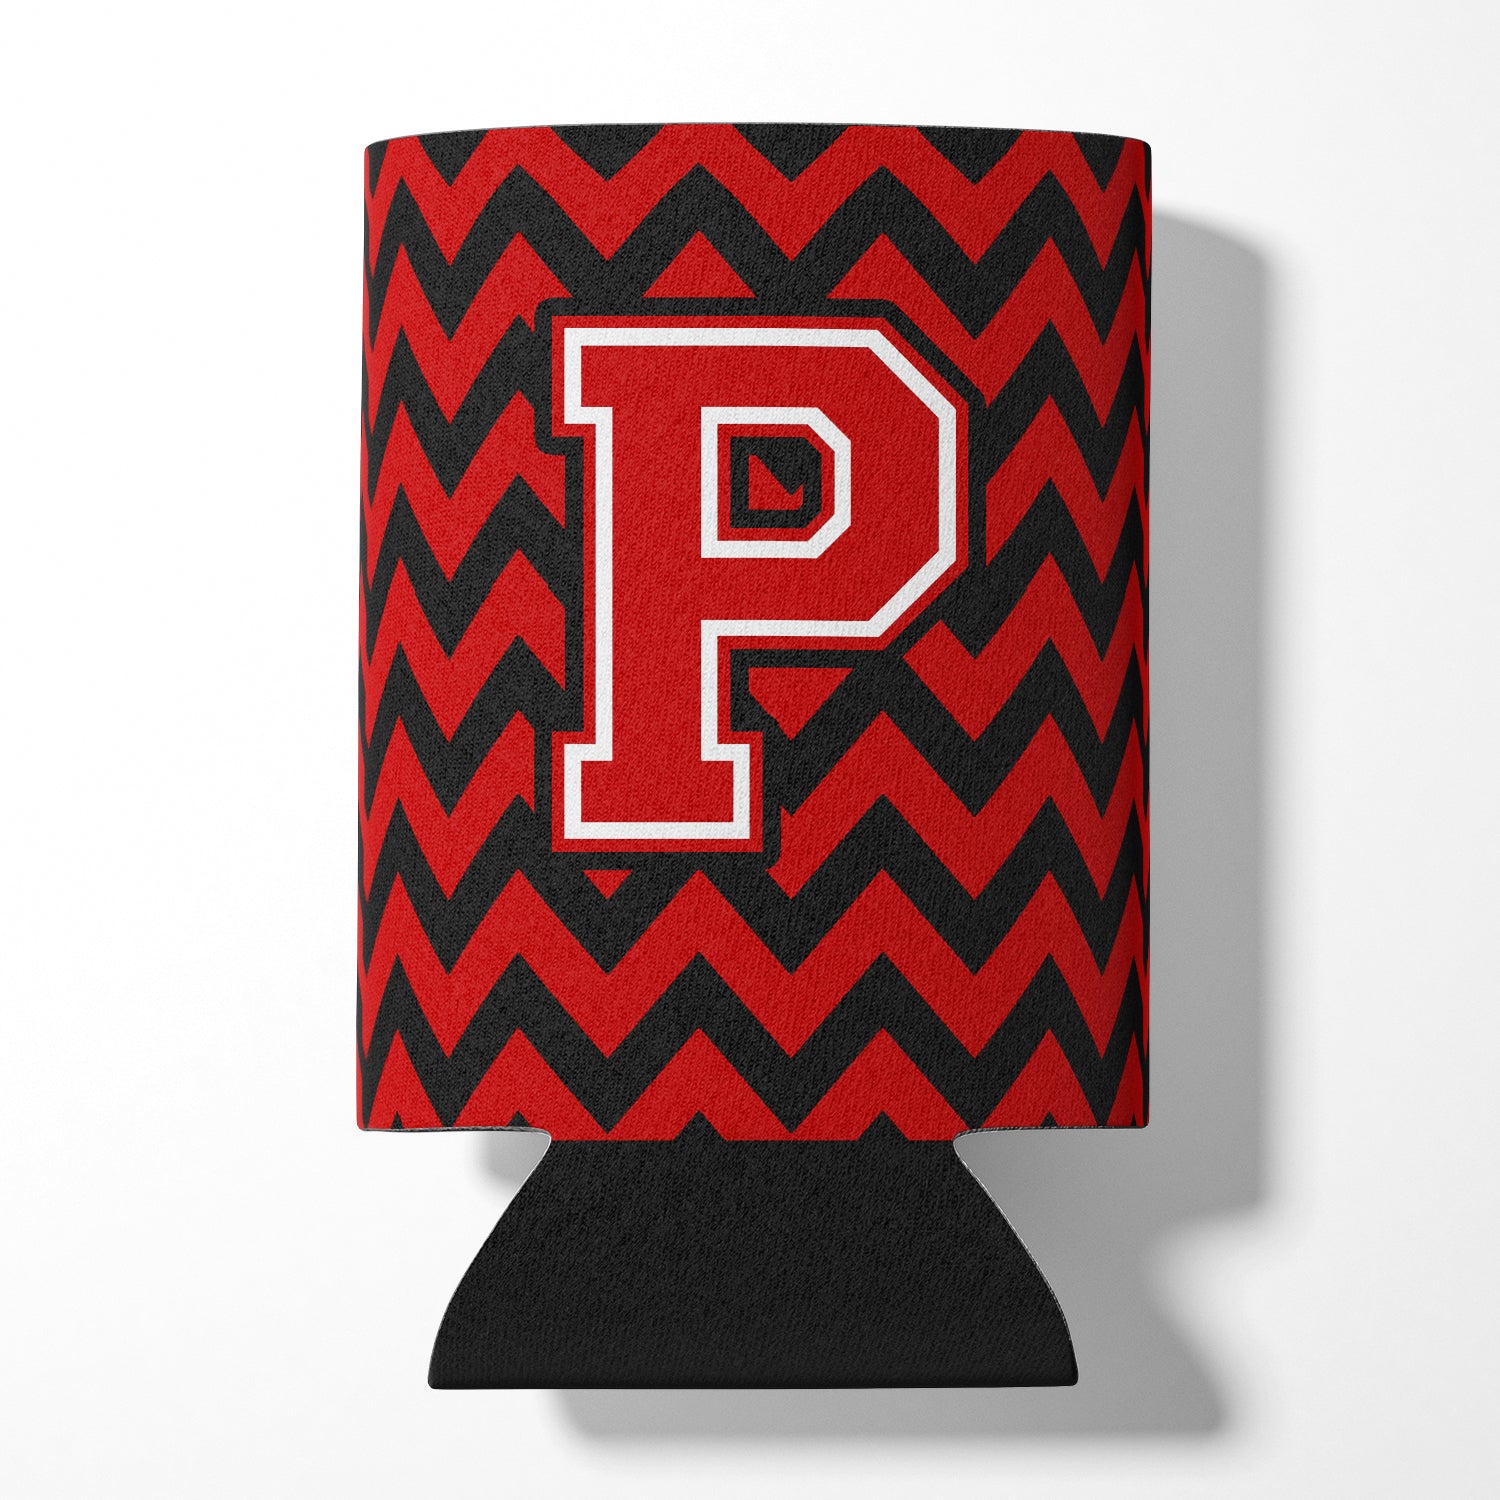 Letter P Chevron Black and Red   Can or Bottle Hugger CJ1047-PCC.